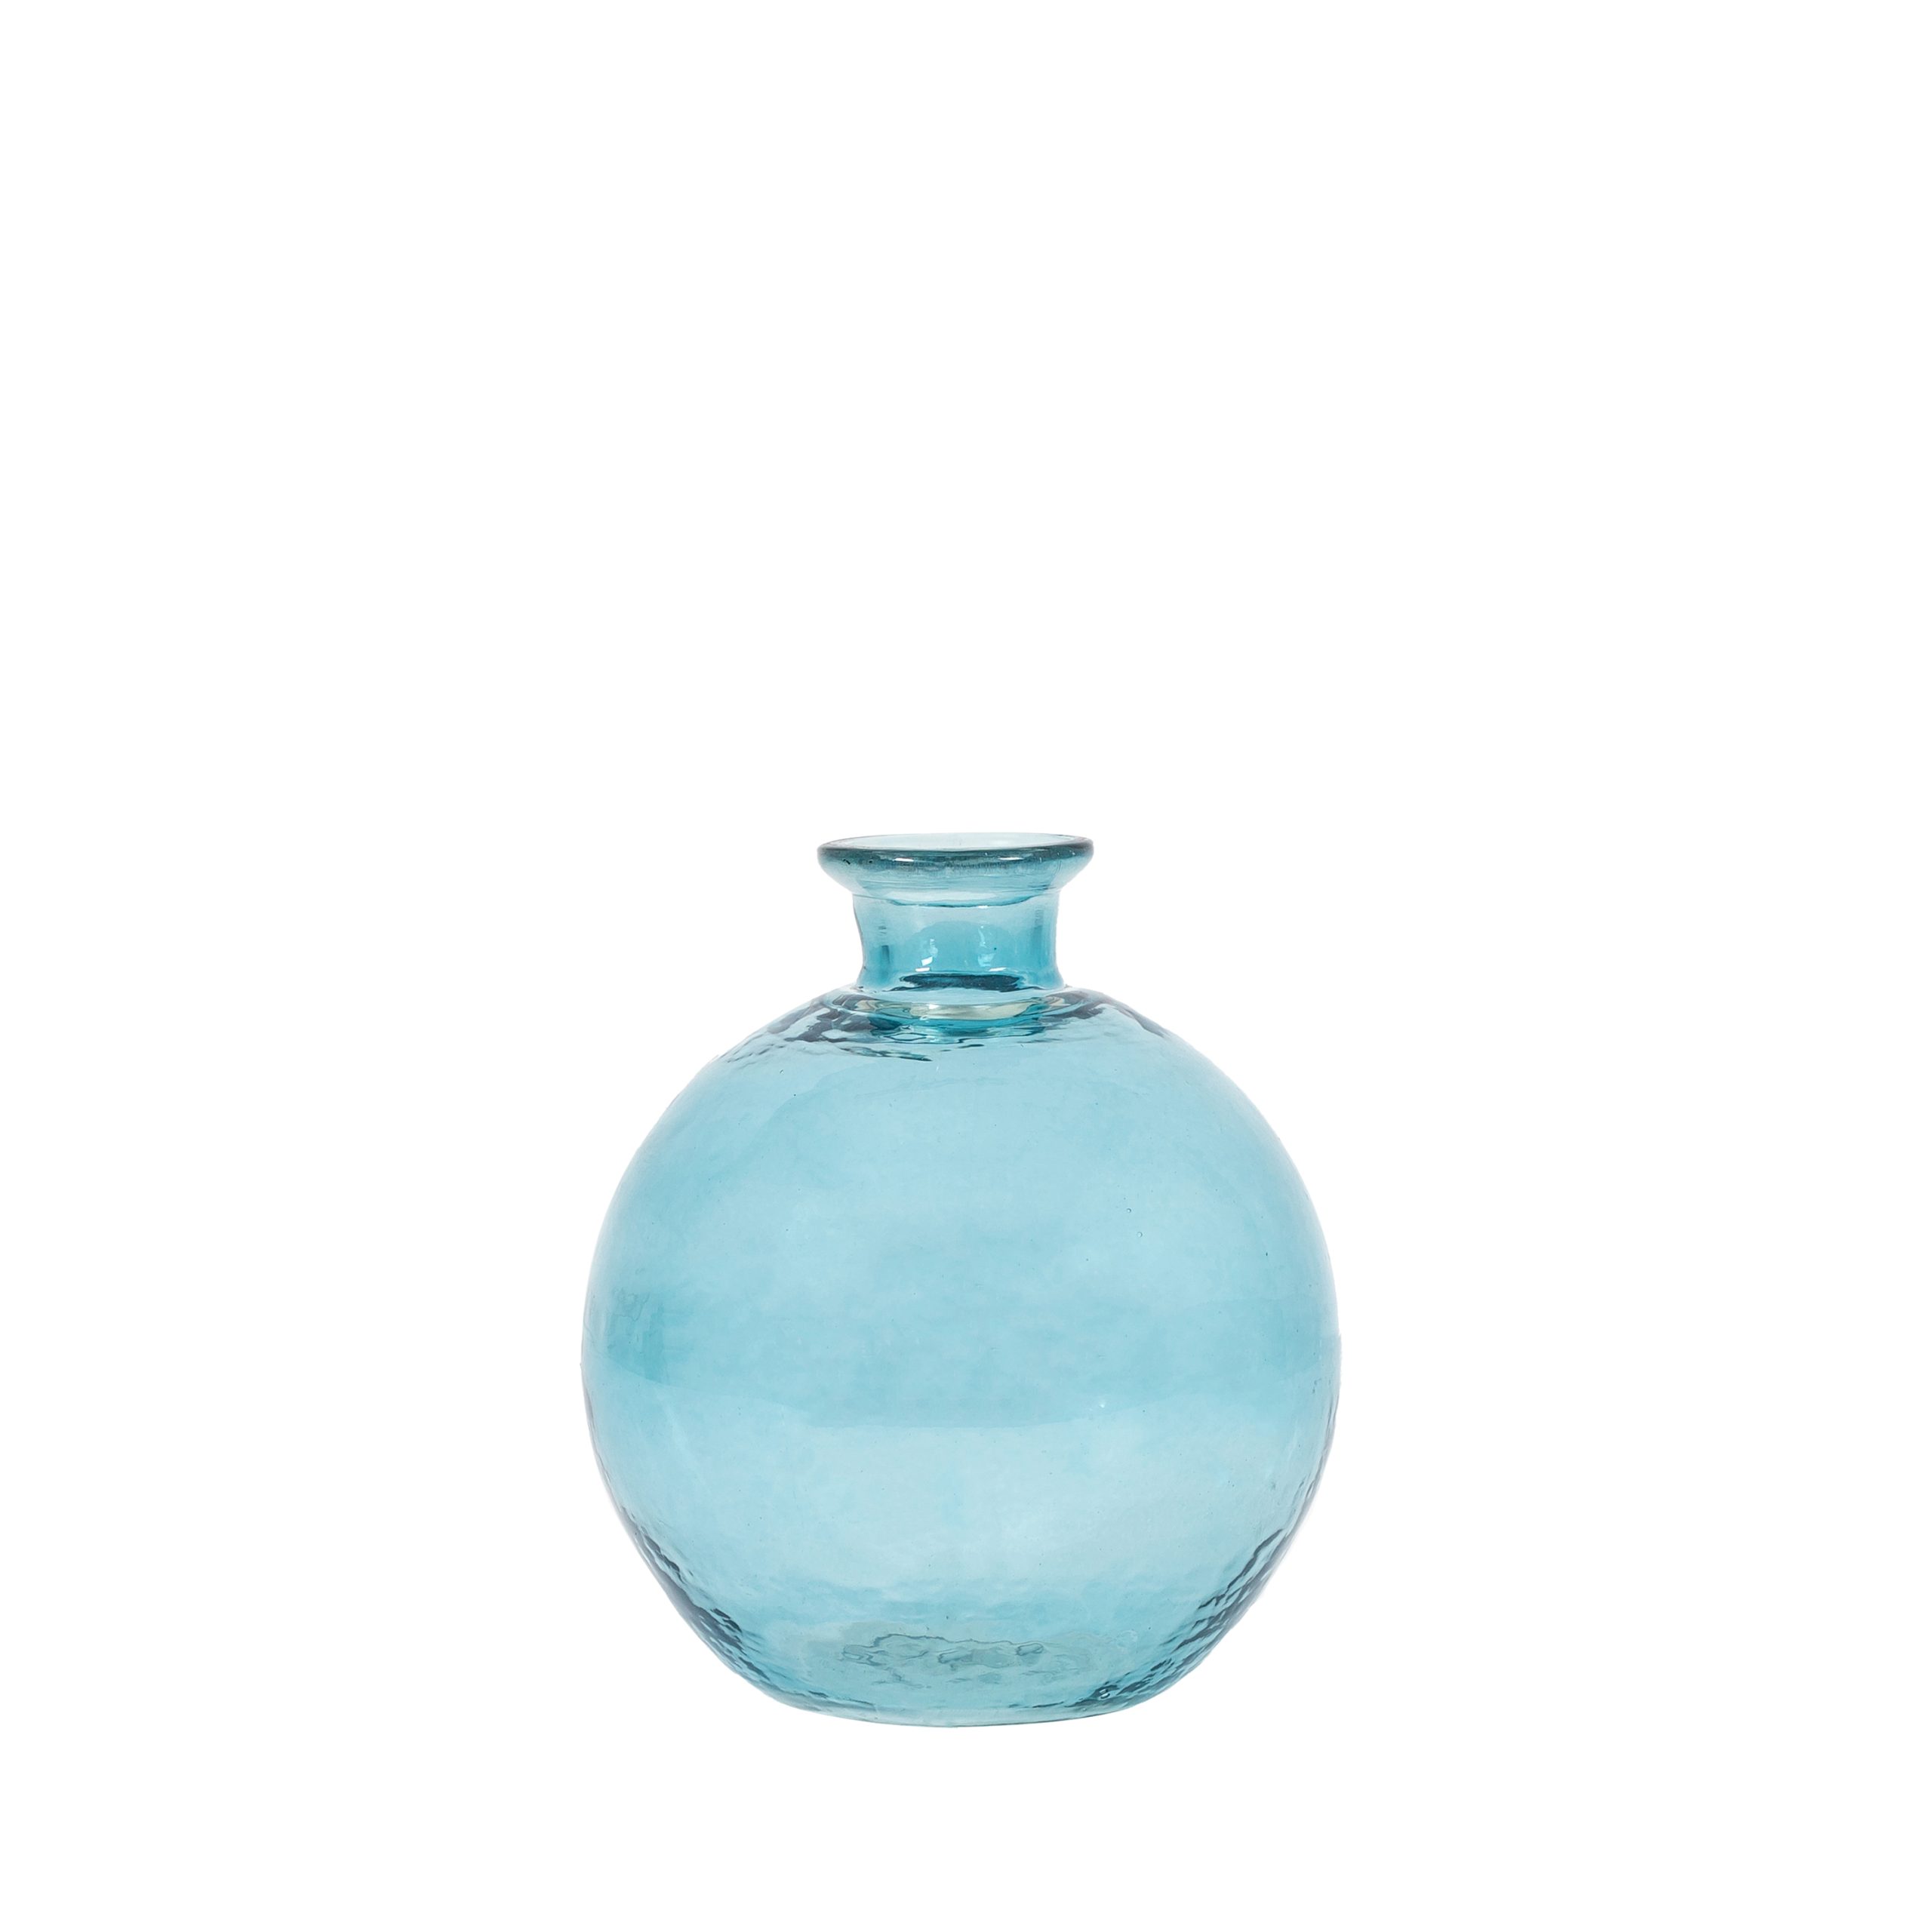 Gallery Direct Ribble Vase Small Ocean Blue